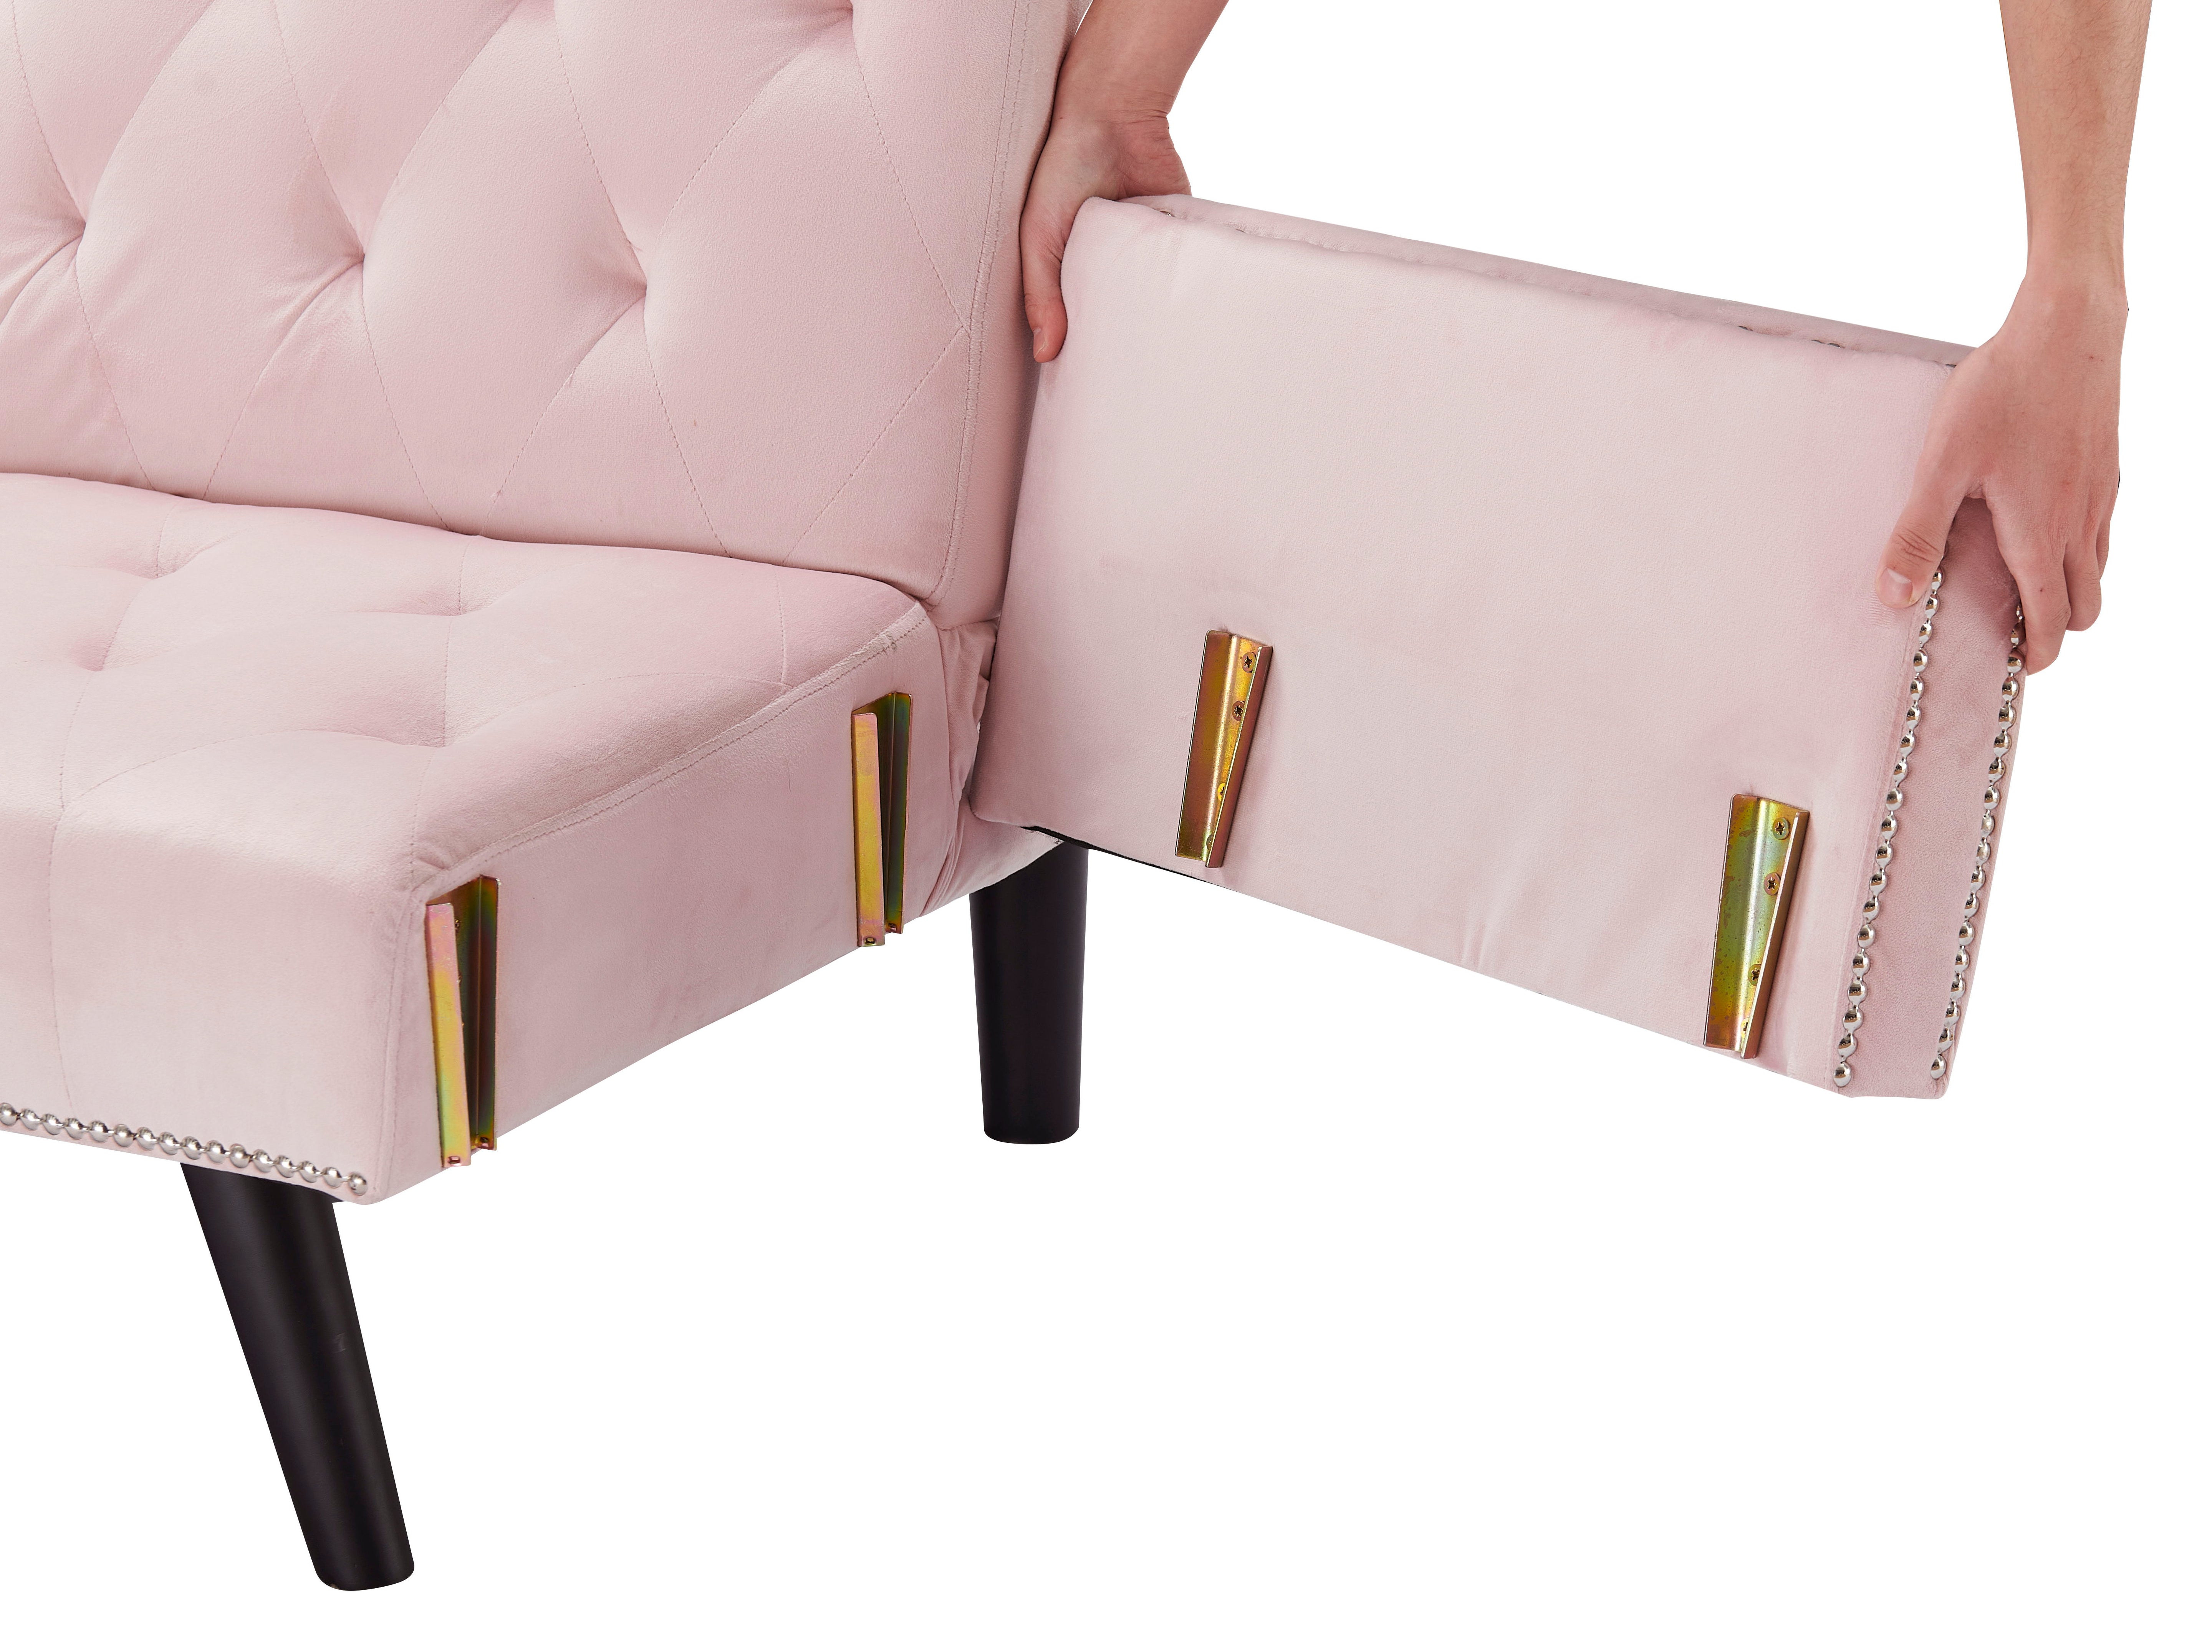 1730 Sofa Bed Armrest With Nail Head Trim With Two Cup Holders 72" Pink Velvet Sofa For Small Spaces